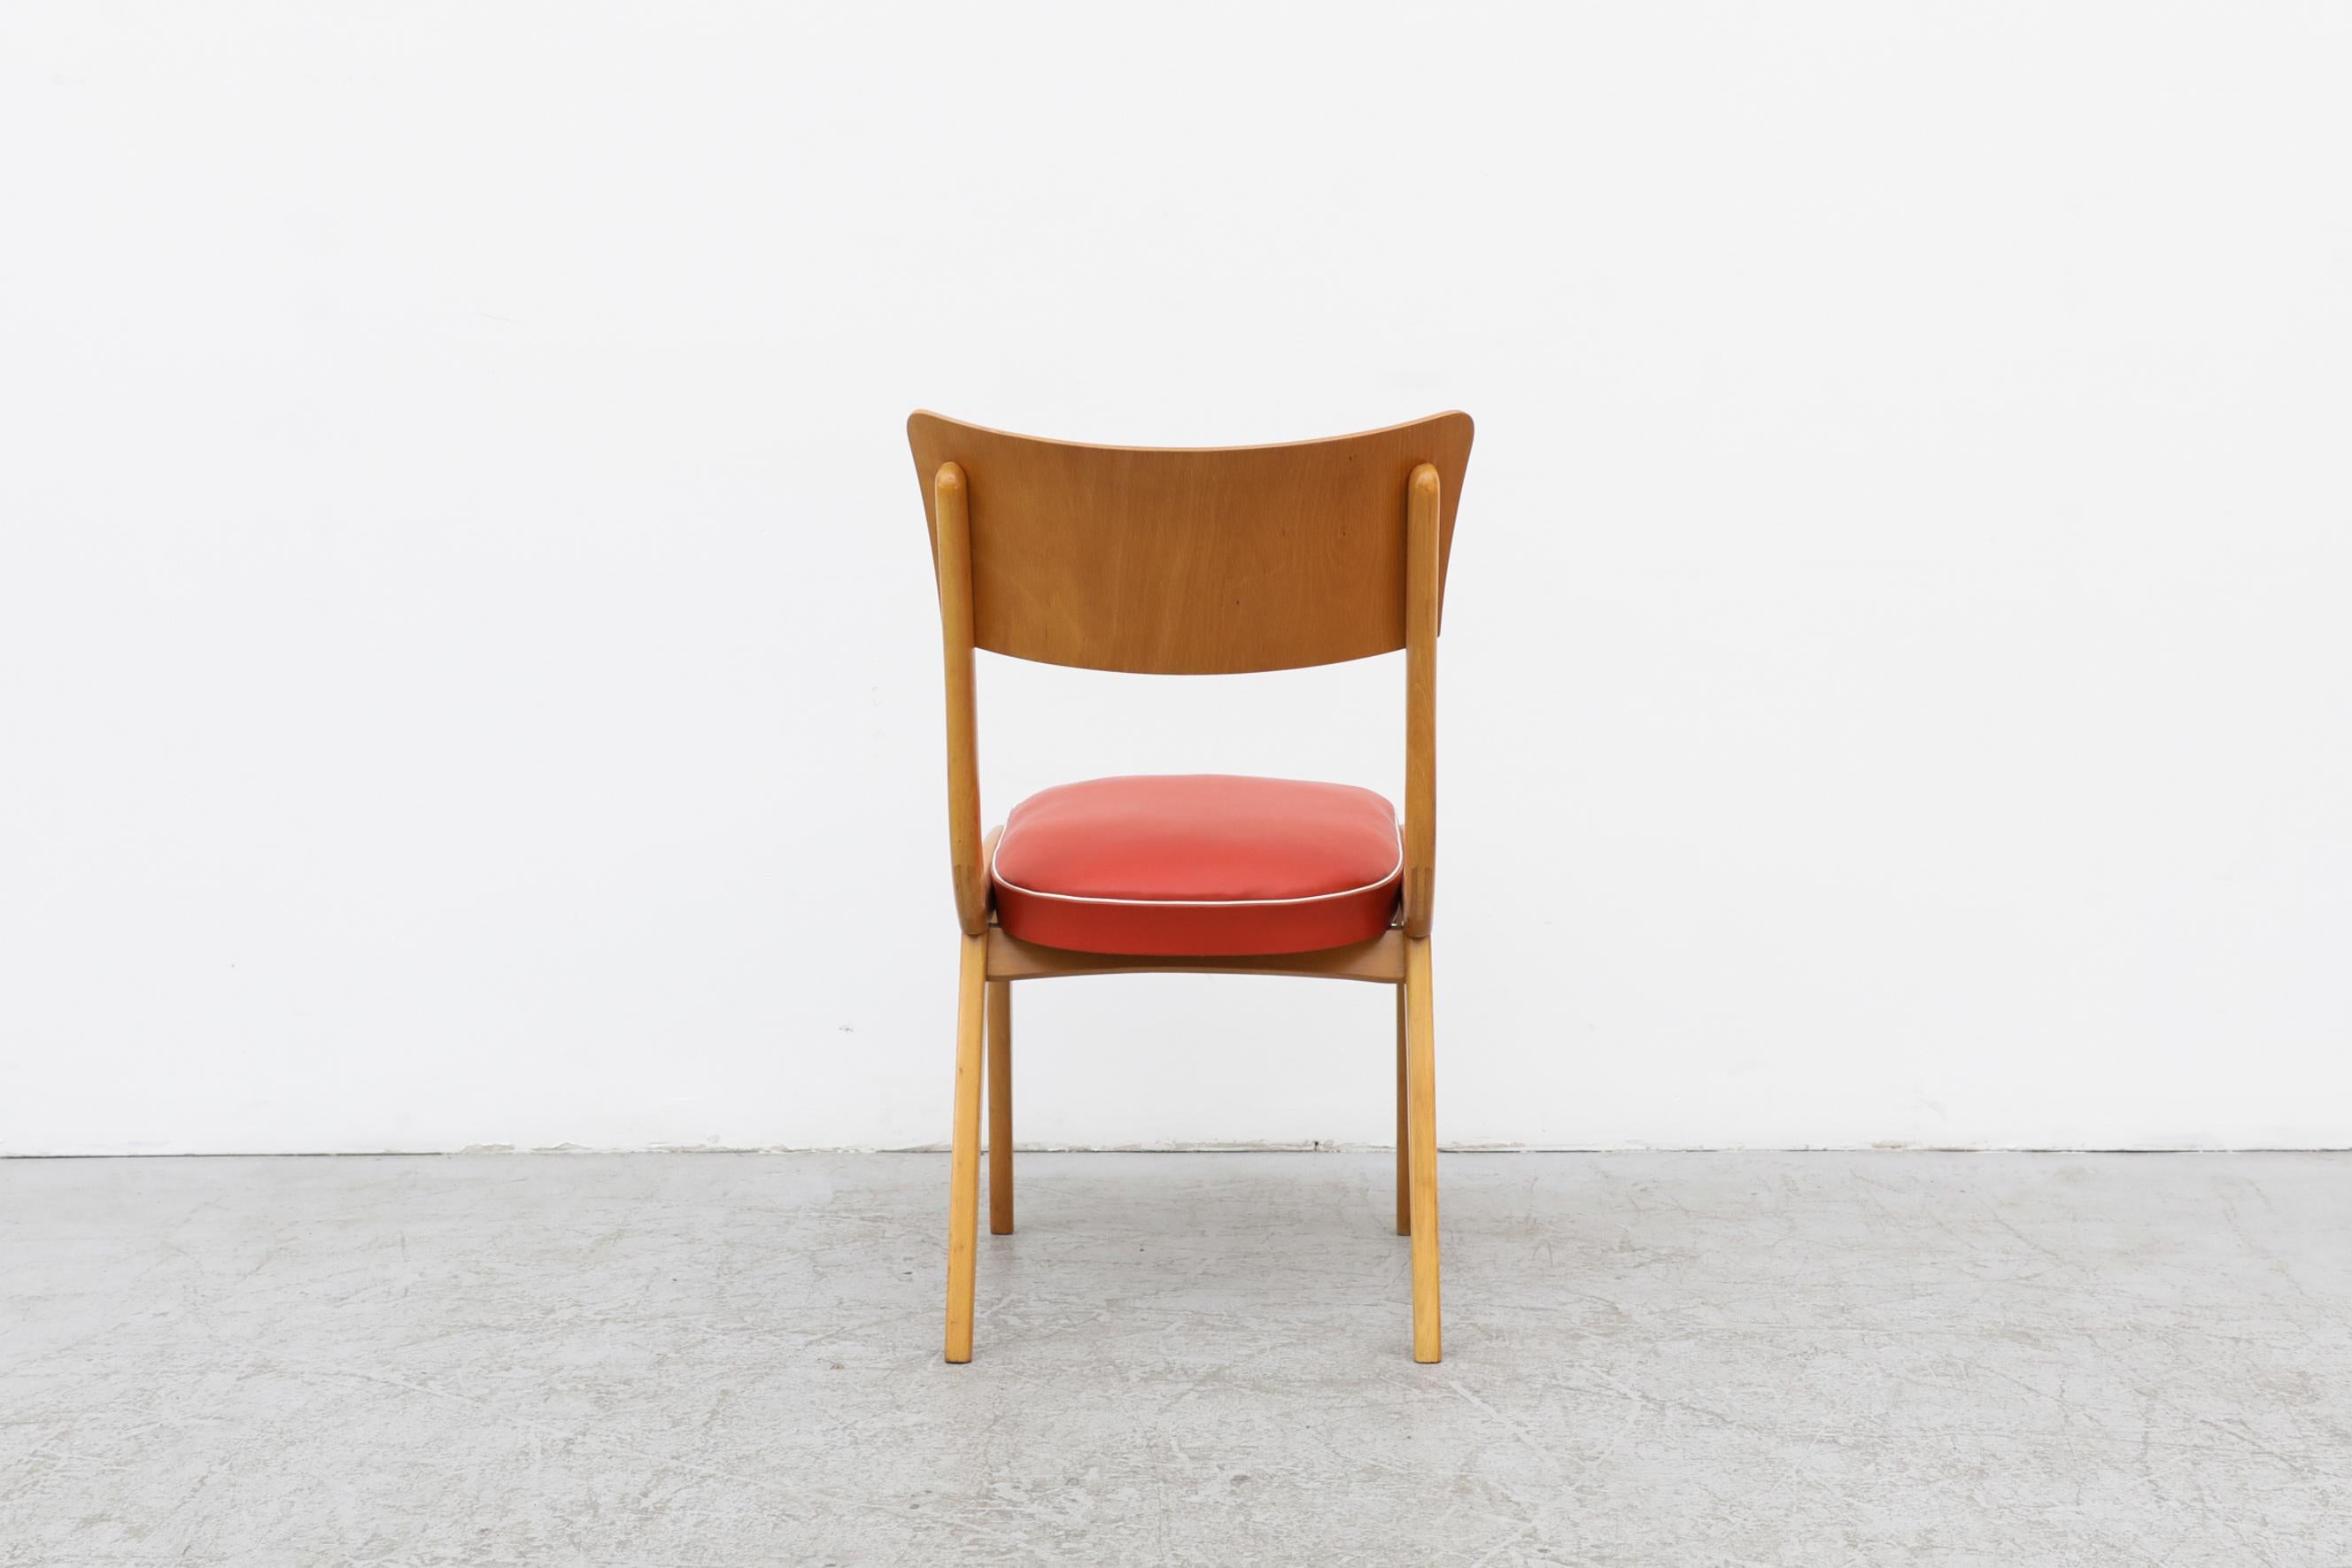 Mid-20th Century Mid-Century Blonde Wood Chair with Red Vinyl Seat, White Piping and Curved Back For Sale